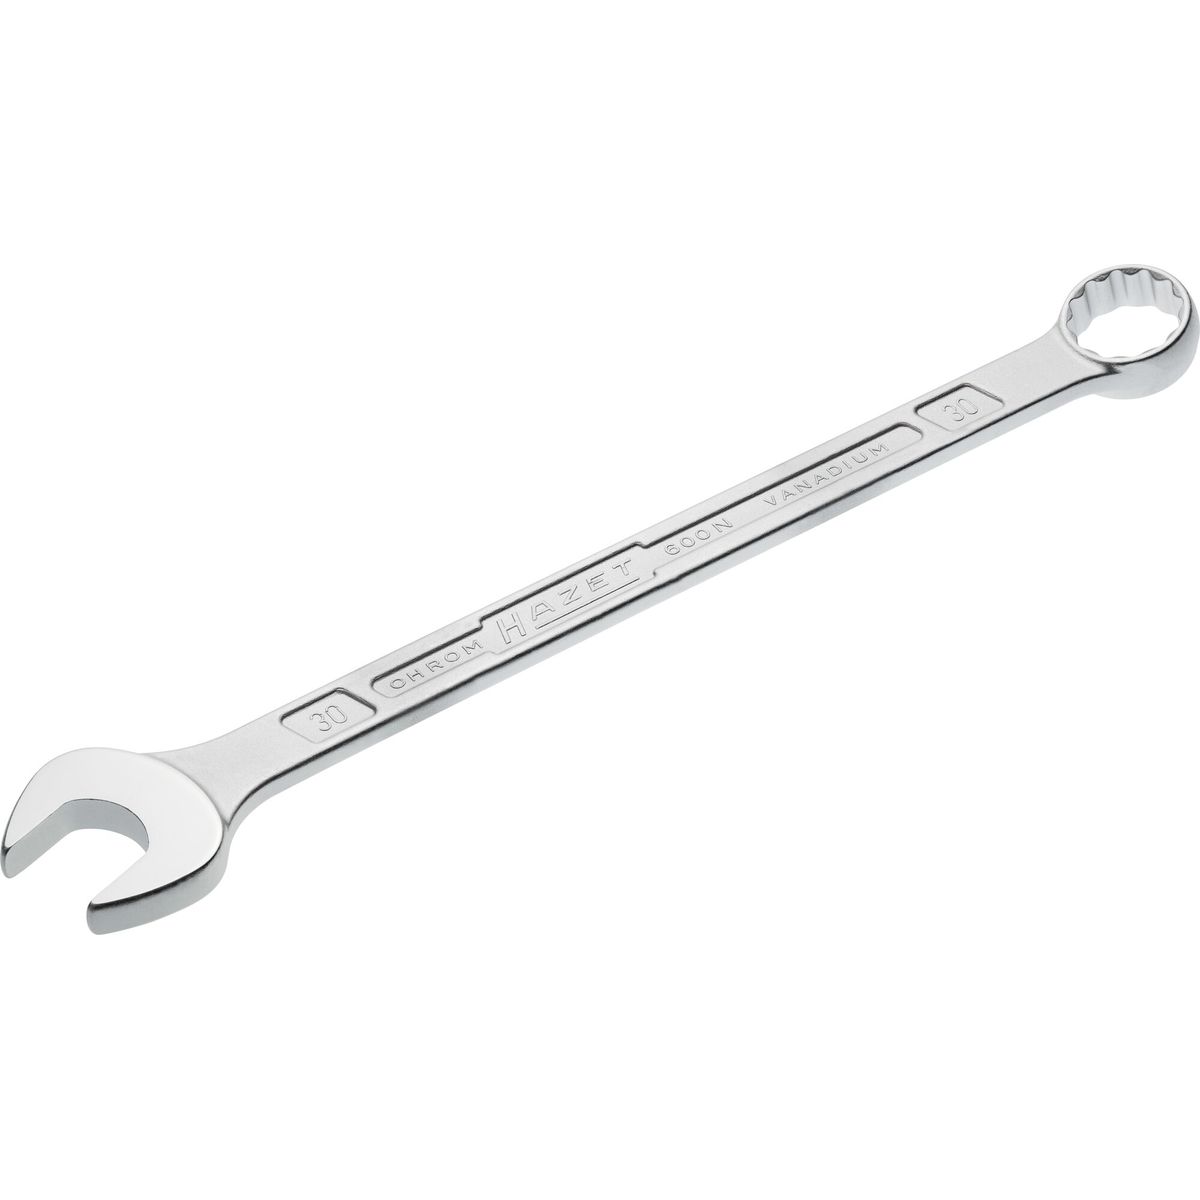 Combination Wrench No.600N-30 Hazet®